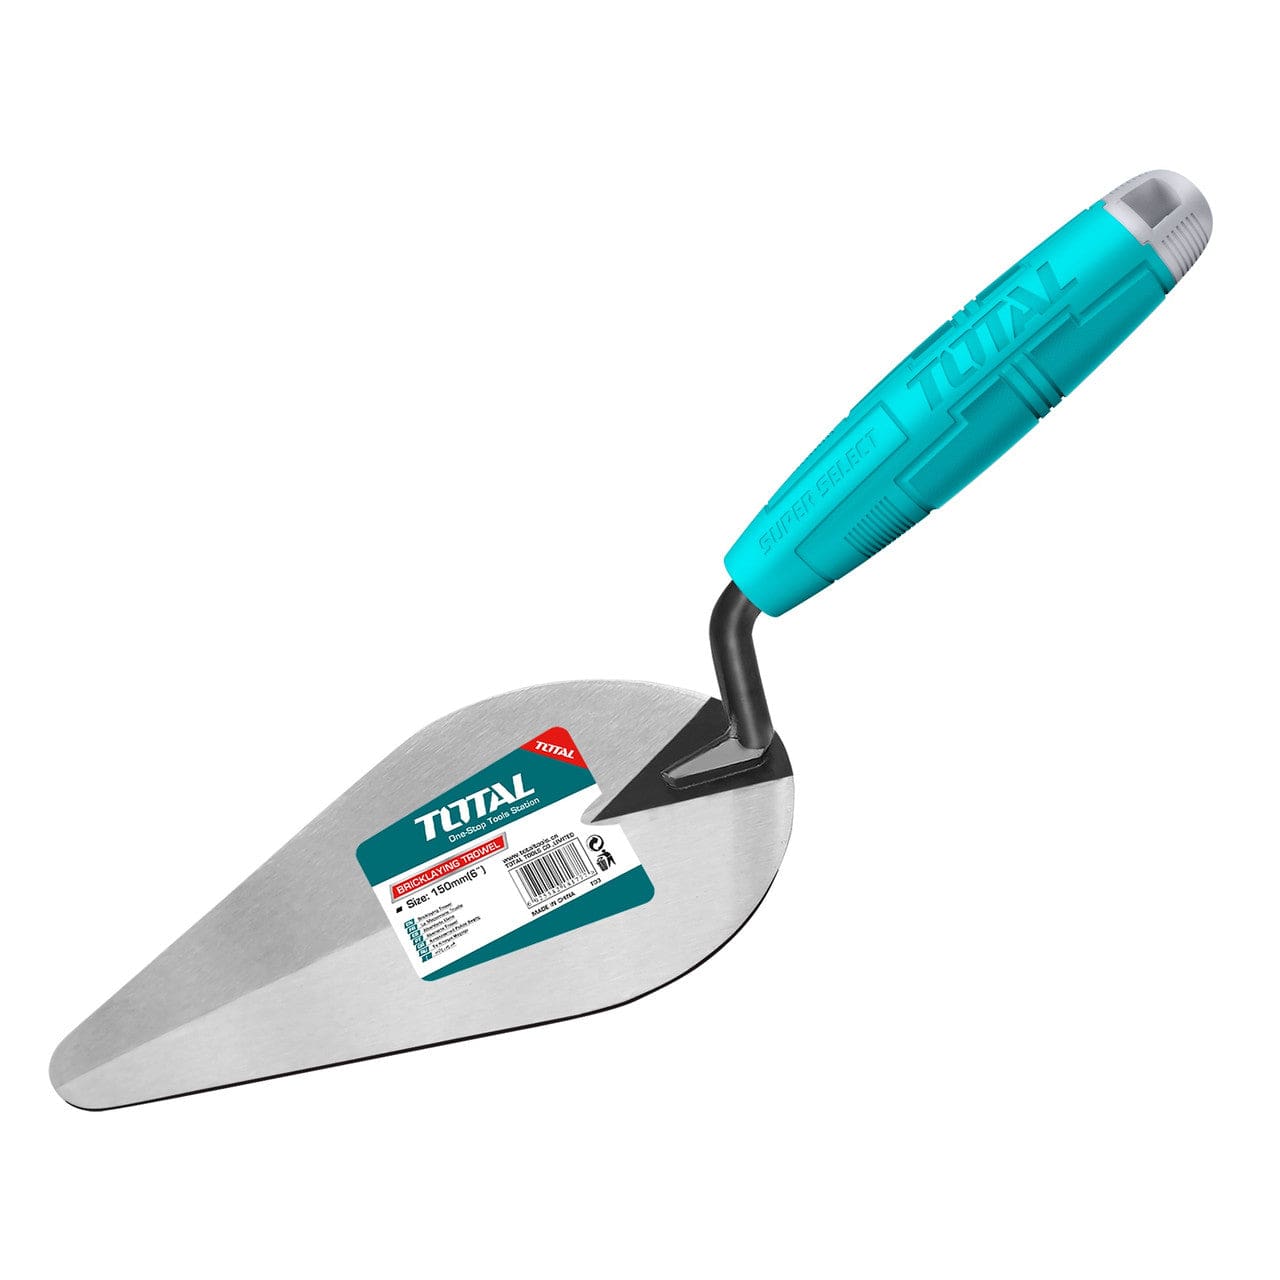 Total Bricklaying Trowel (plastic handle) 6''/150mm - THT826125 | Supply Master | Accra, Ghana Specialty Hand Tools Buy Tools hardware Building materials